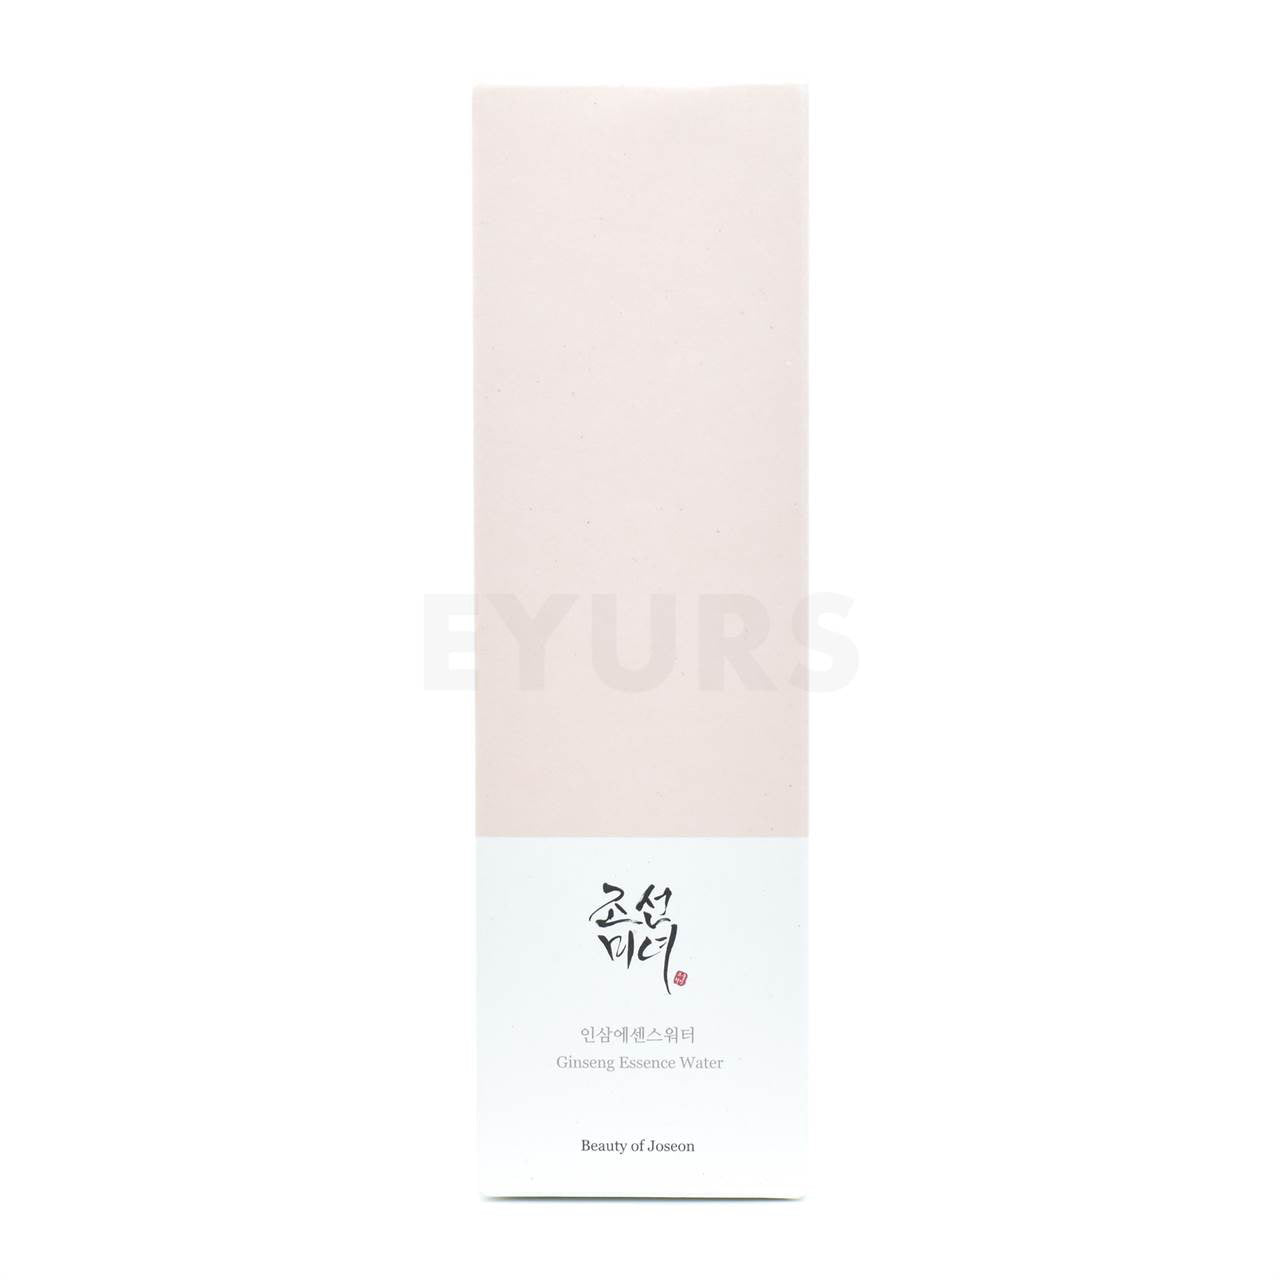 beauty of joseon ginseng essence water front side packaging